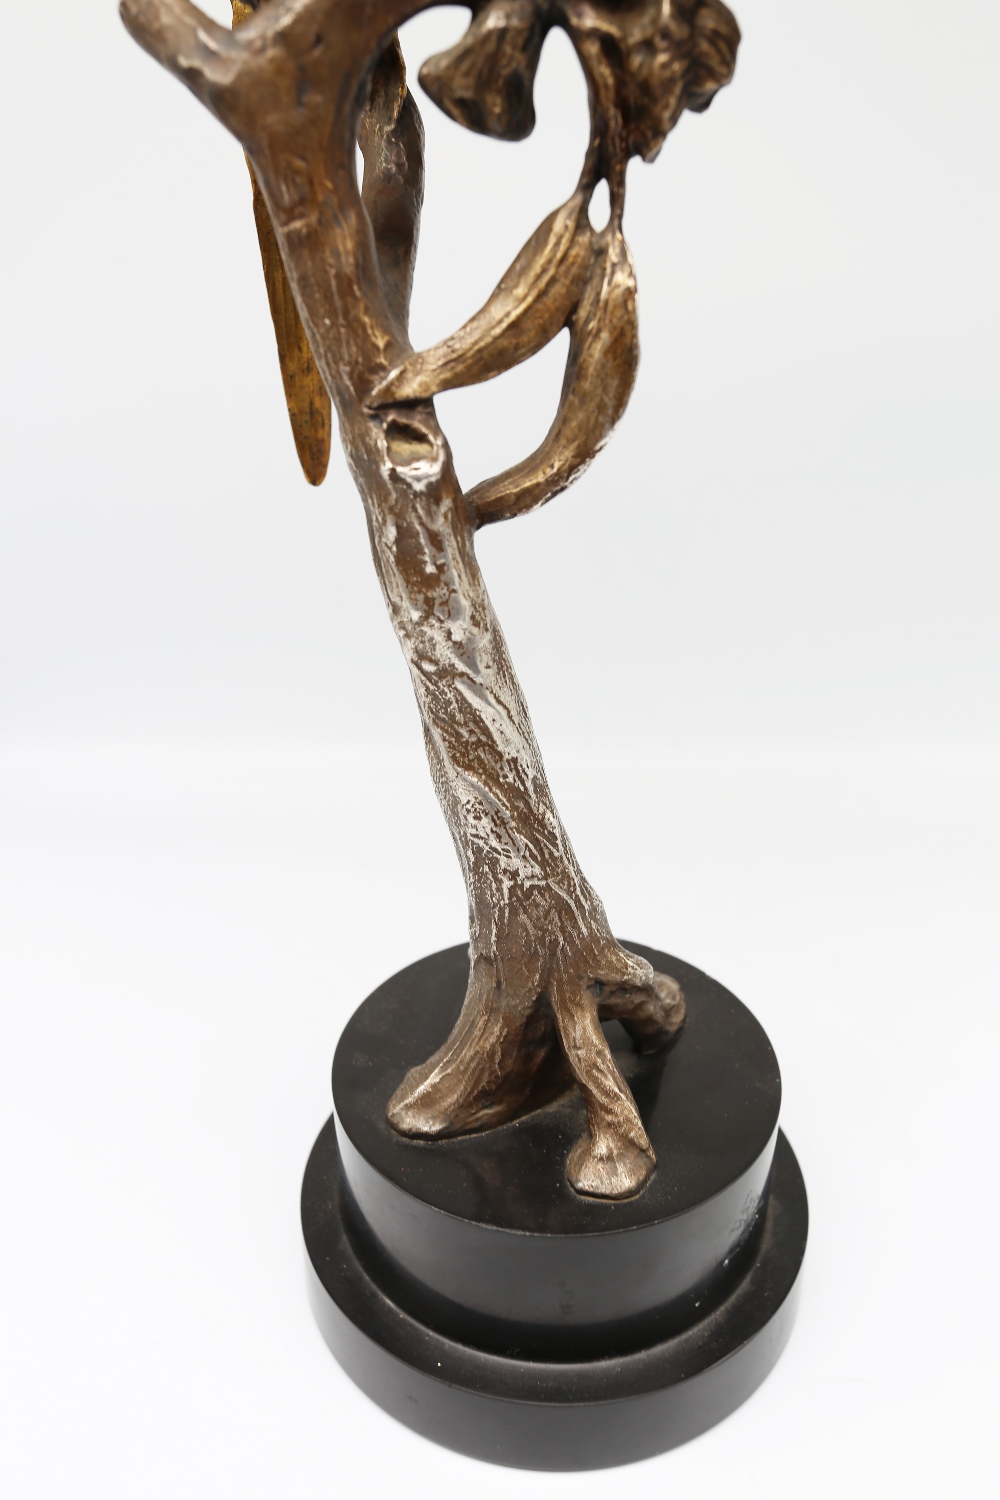 A French 20th century gilded bronze model of Love Birds signed R Durquet on polished stone plinth. - Image 3 of 4